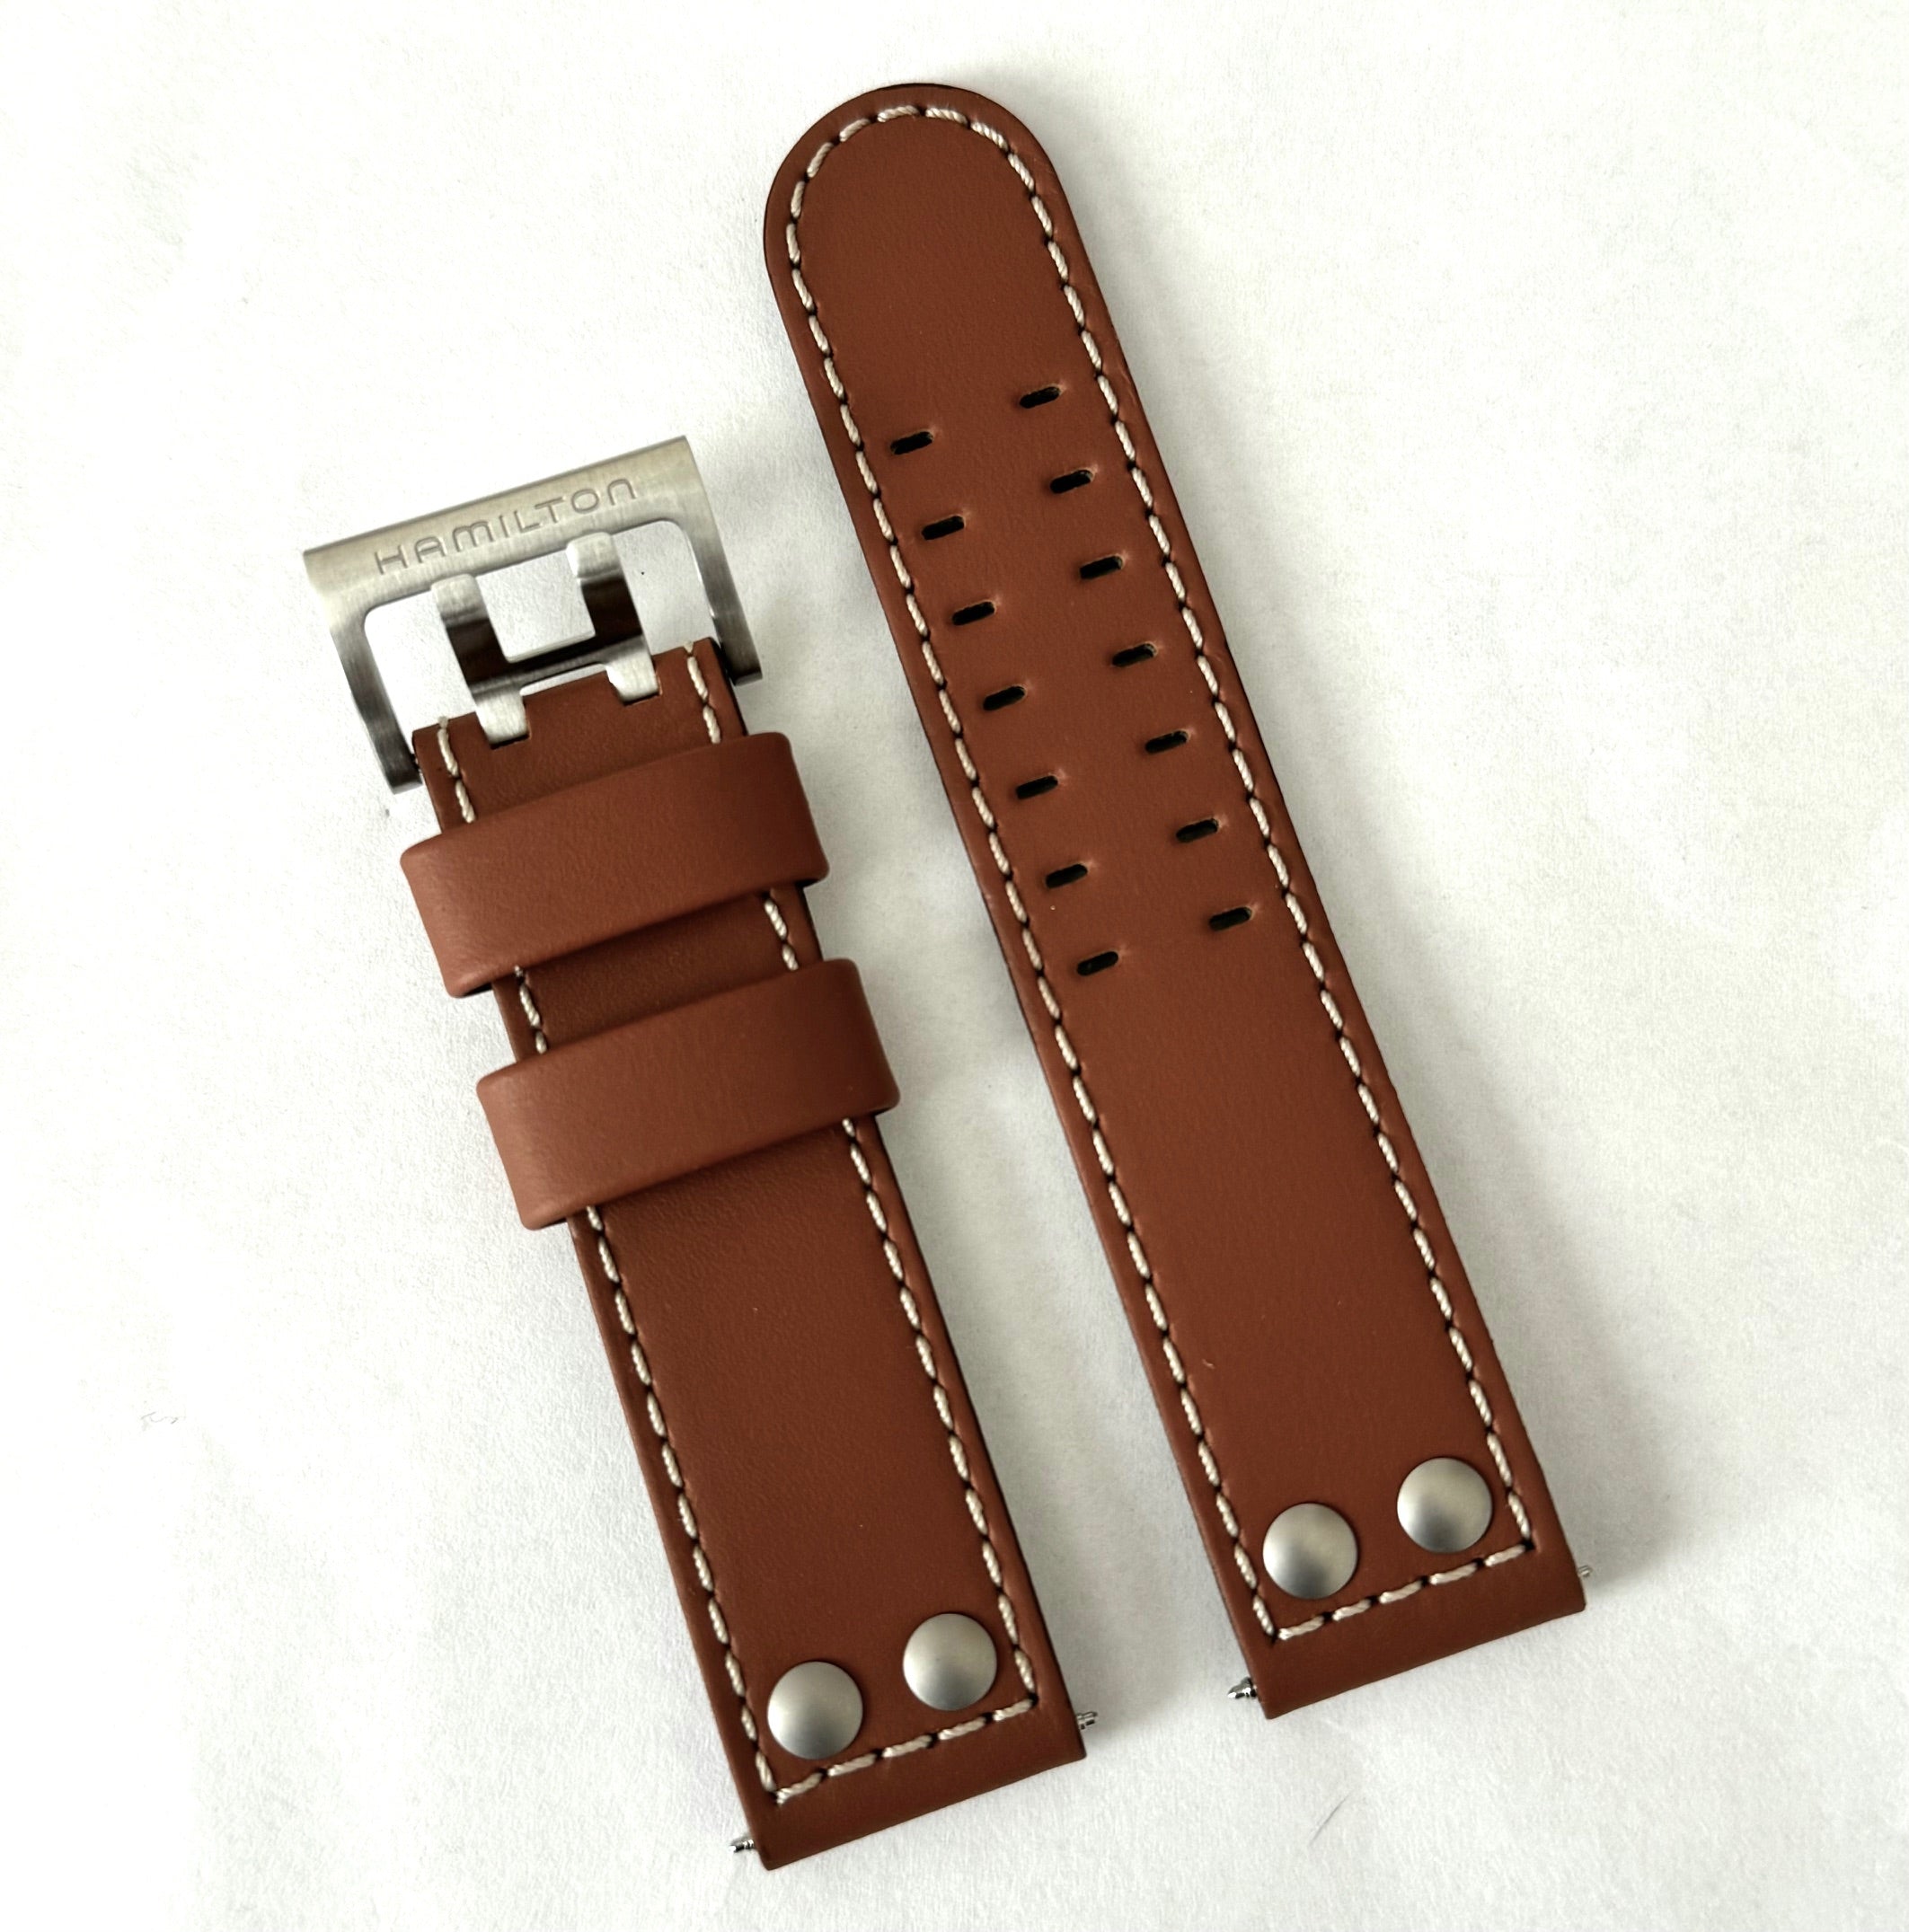 Hamilton X-Wind 22mm (Longer Size) Brown Leather Band Strap